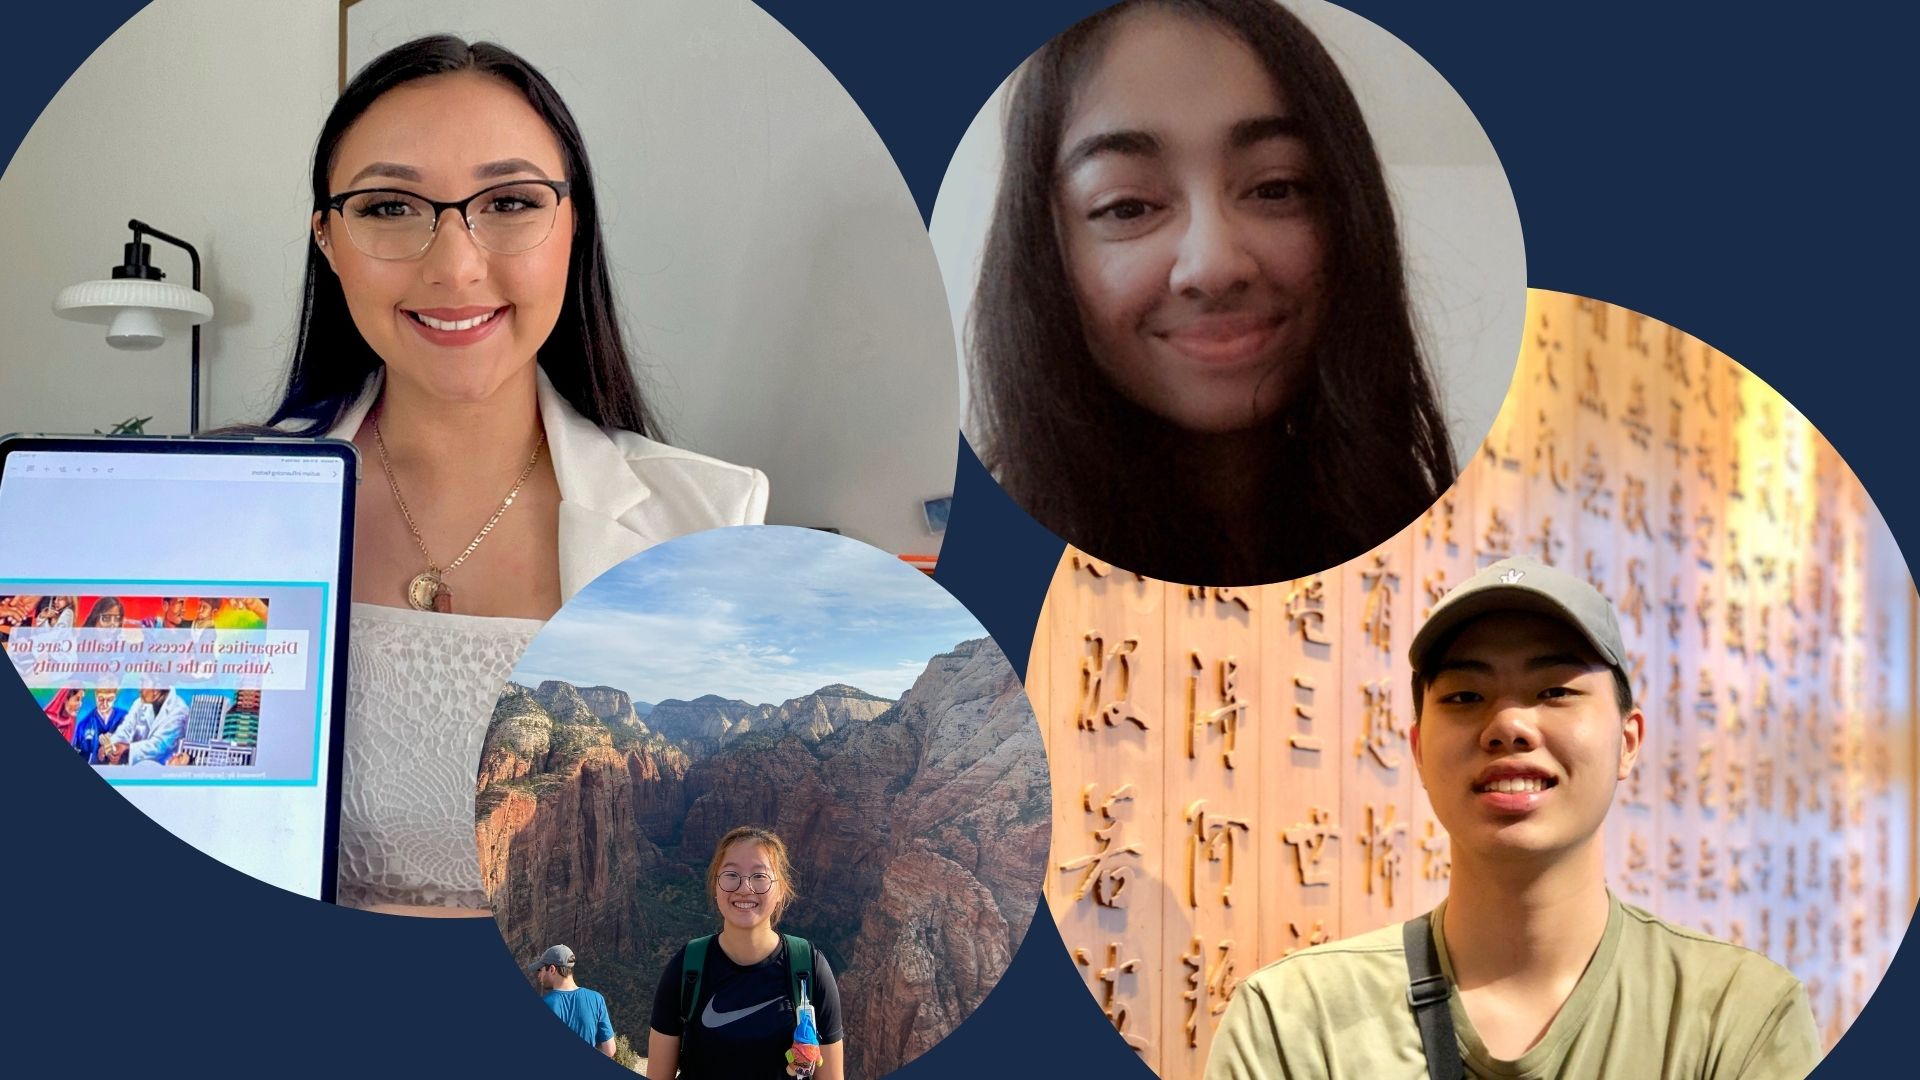 The UC San Diego Library's 2021 Undergraduate Library Research Prize (ULRP) honorees. From left to right: Jacqueline (Jackie) Villasenor, Rachel Tam, Shruti Magesh and Joseph Tsai.